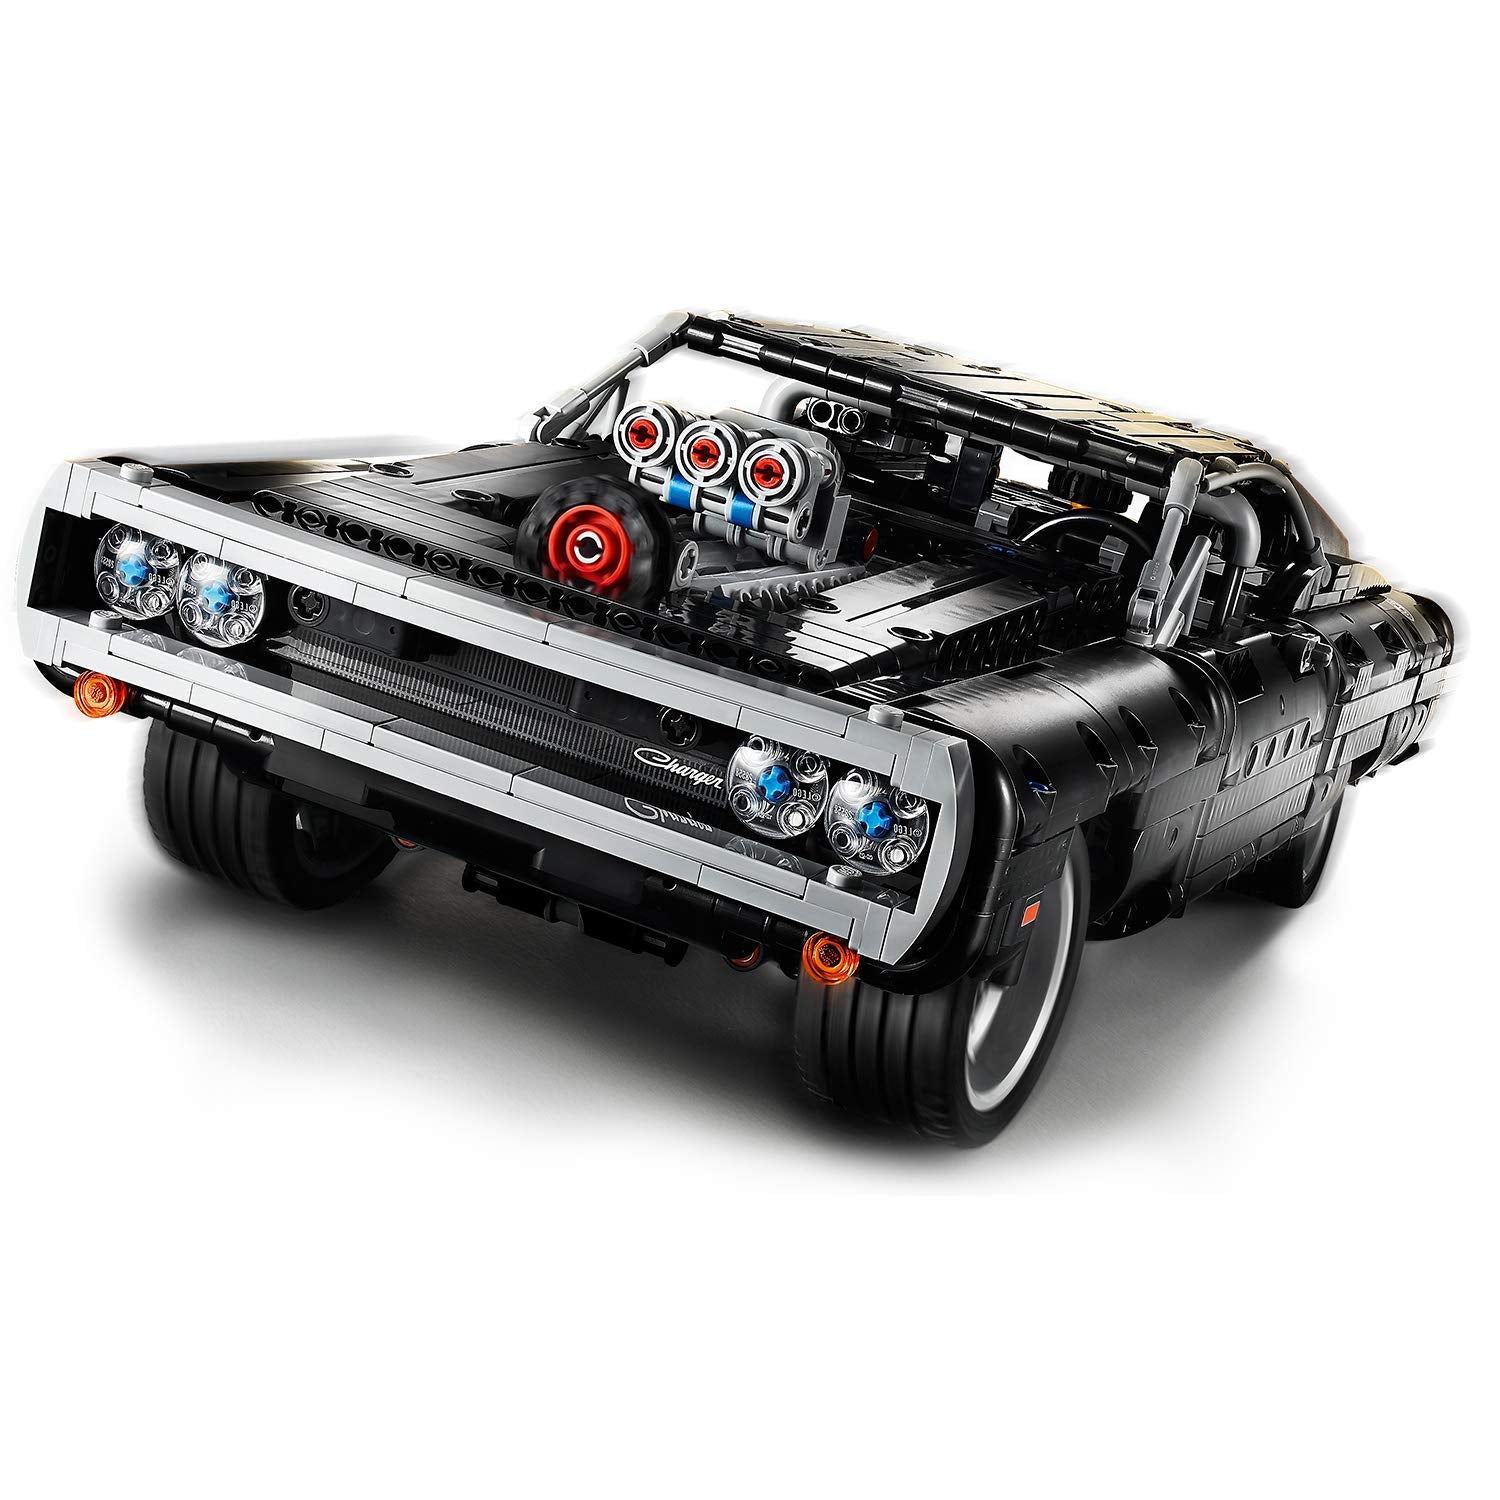 LEGO Technic Fast & Furious Dom’s Dodge Charger 42111 Race Car Building Set, New 2020 (1,077 Pieces)